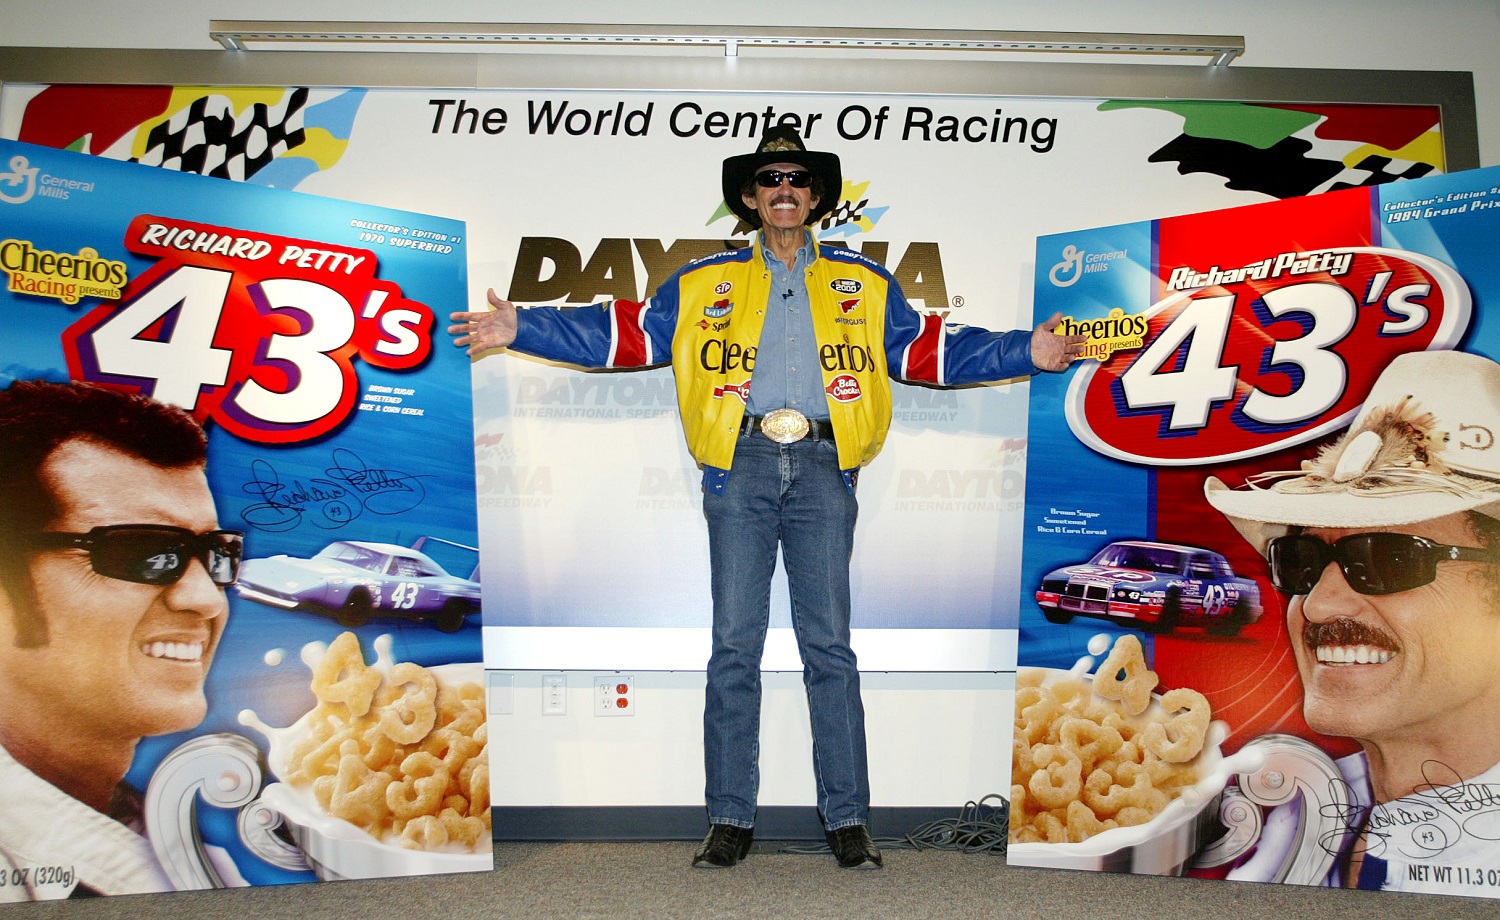 General Mills salutes Richard Petty with a cereal made up of the numbers 4 and 3, the legend's racing number, at the NASCAR Winston Cup Daytona 500 on Feb. 12, 2003.